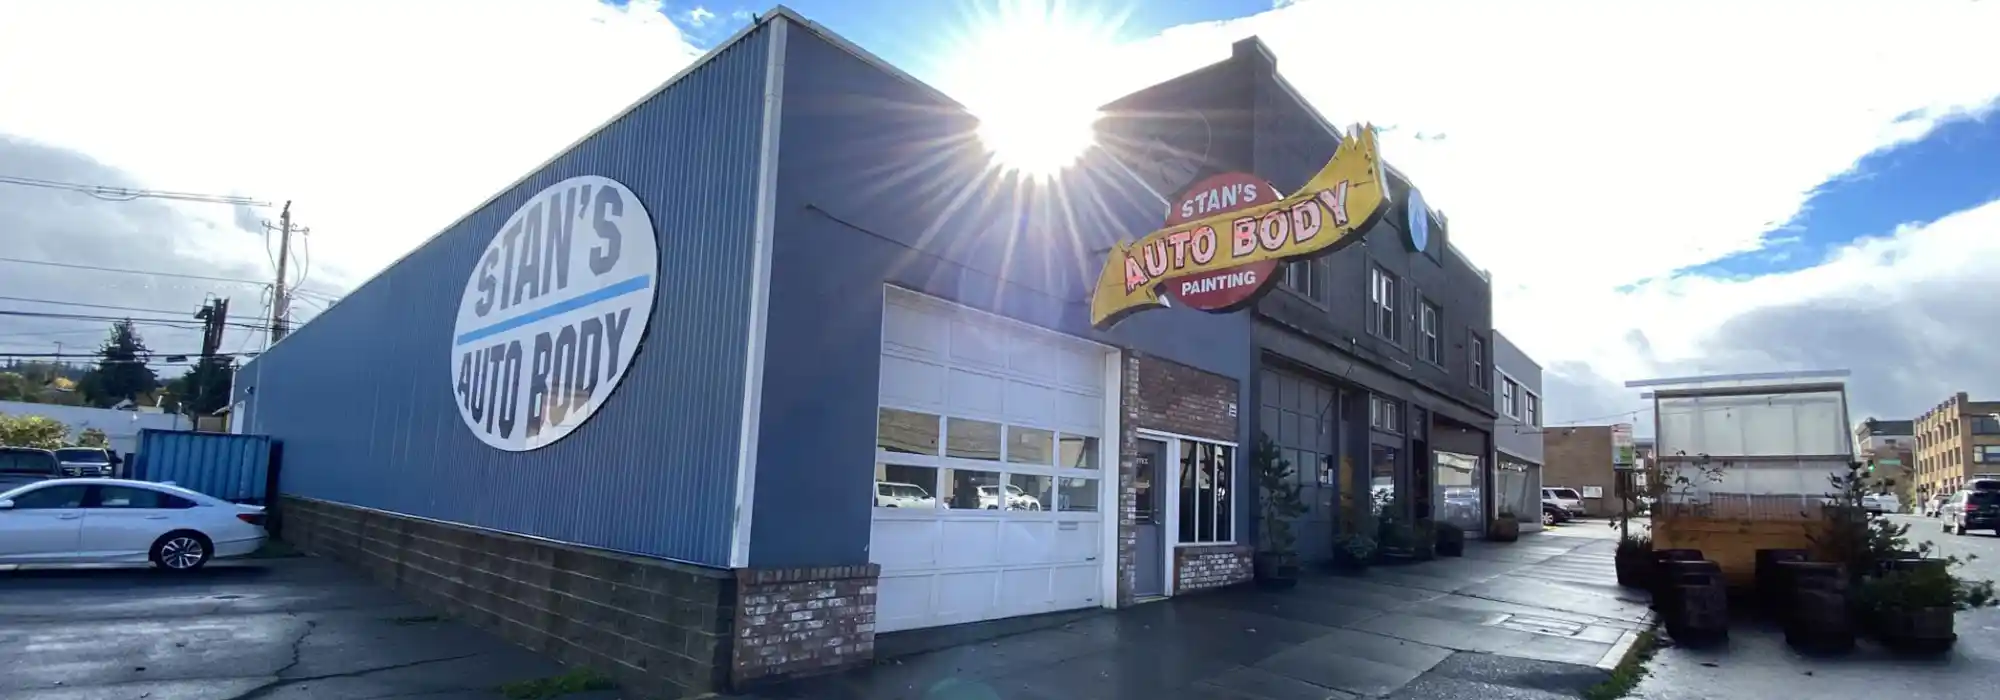 A view of the Stan's Auto Body building. The garage entrance and front door are shown, as well as large signs at the front and sides of the building with the business name on them.